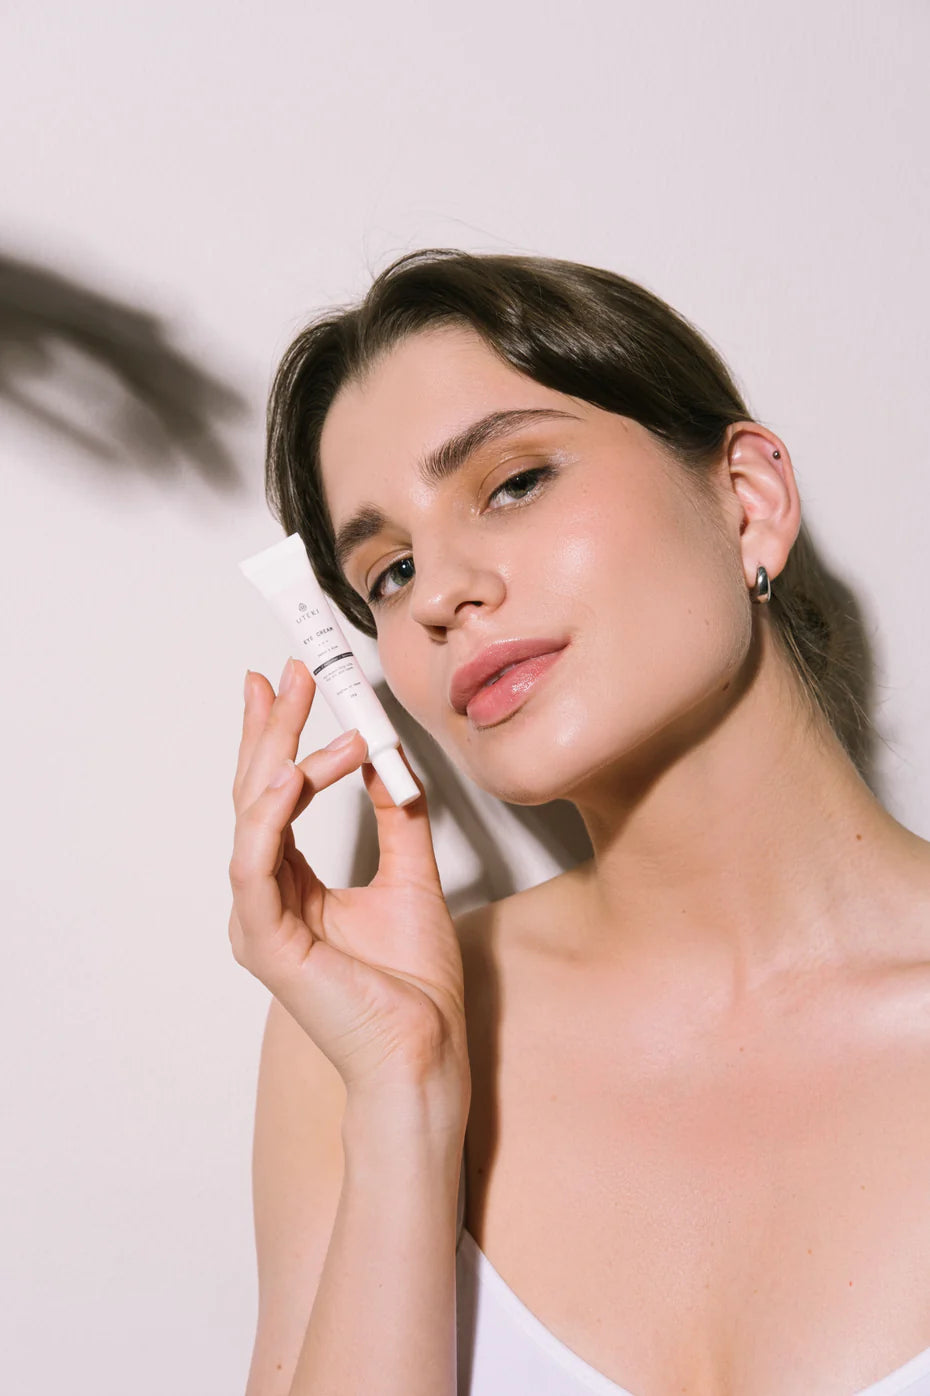 Skin Sebum: What is it and How to Regulate its Production